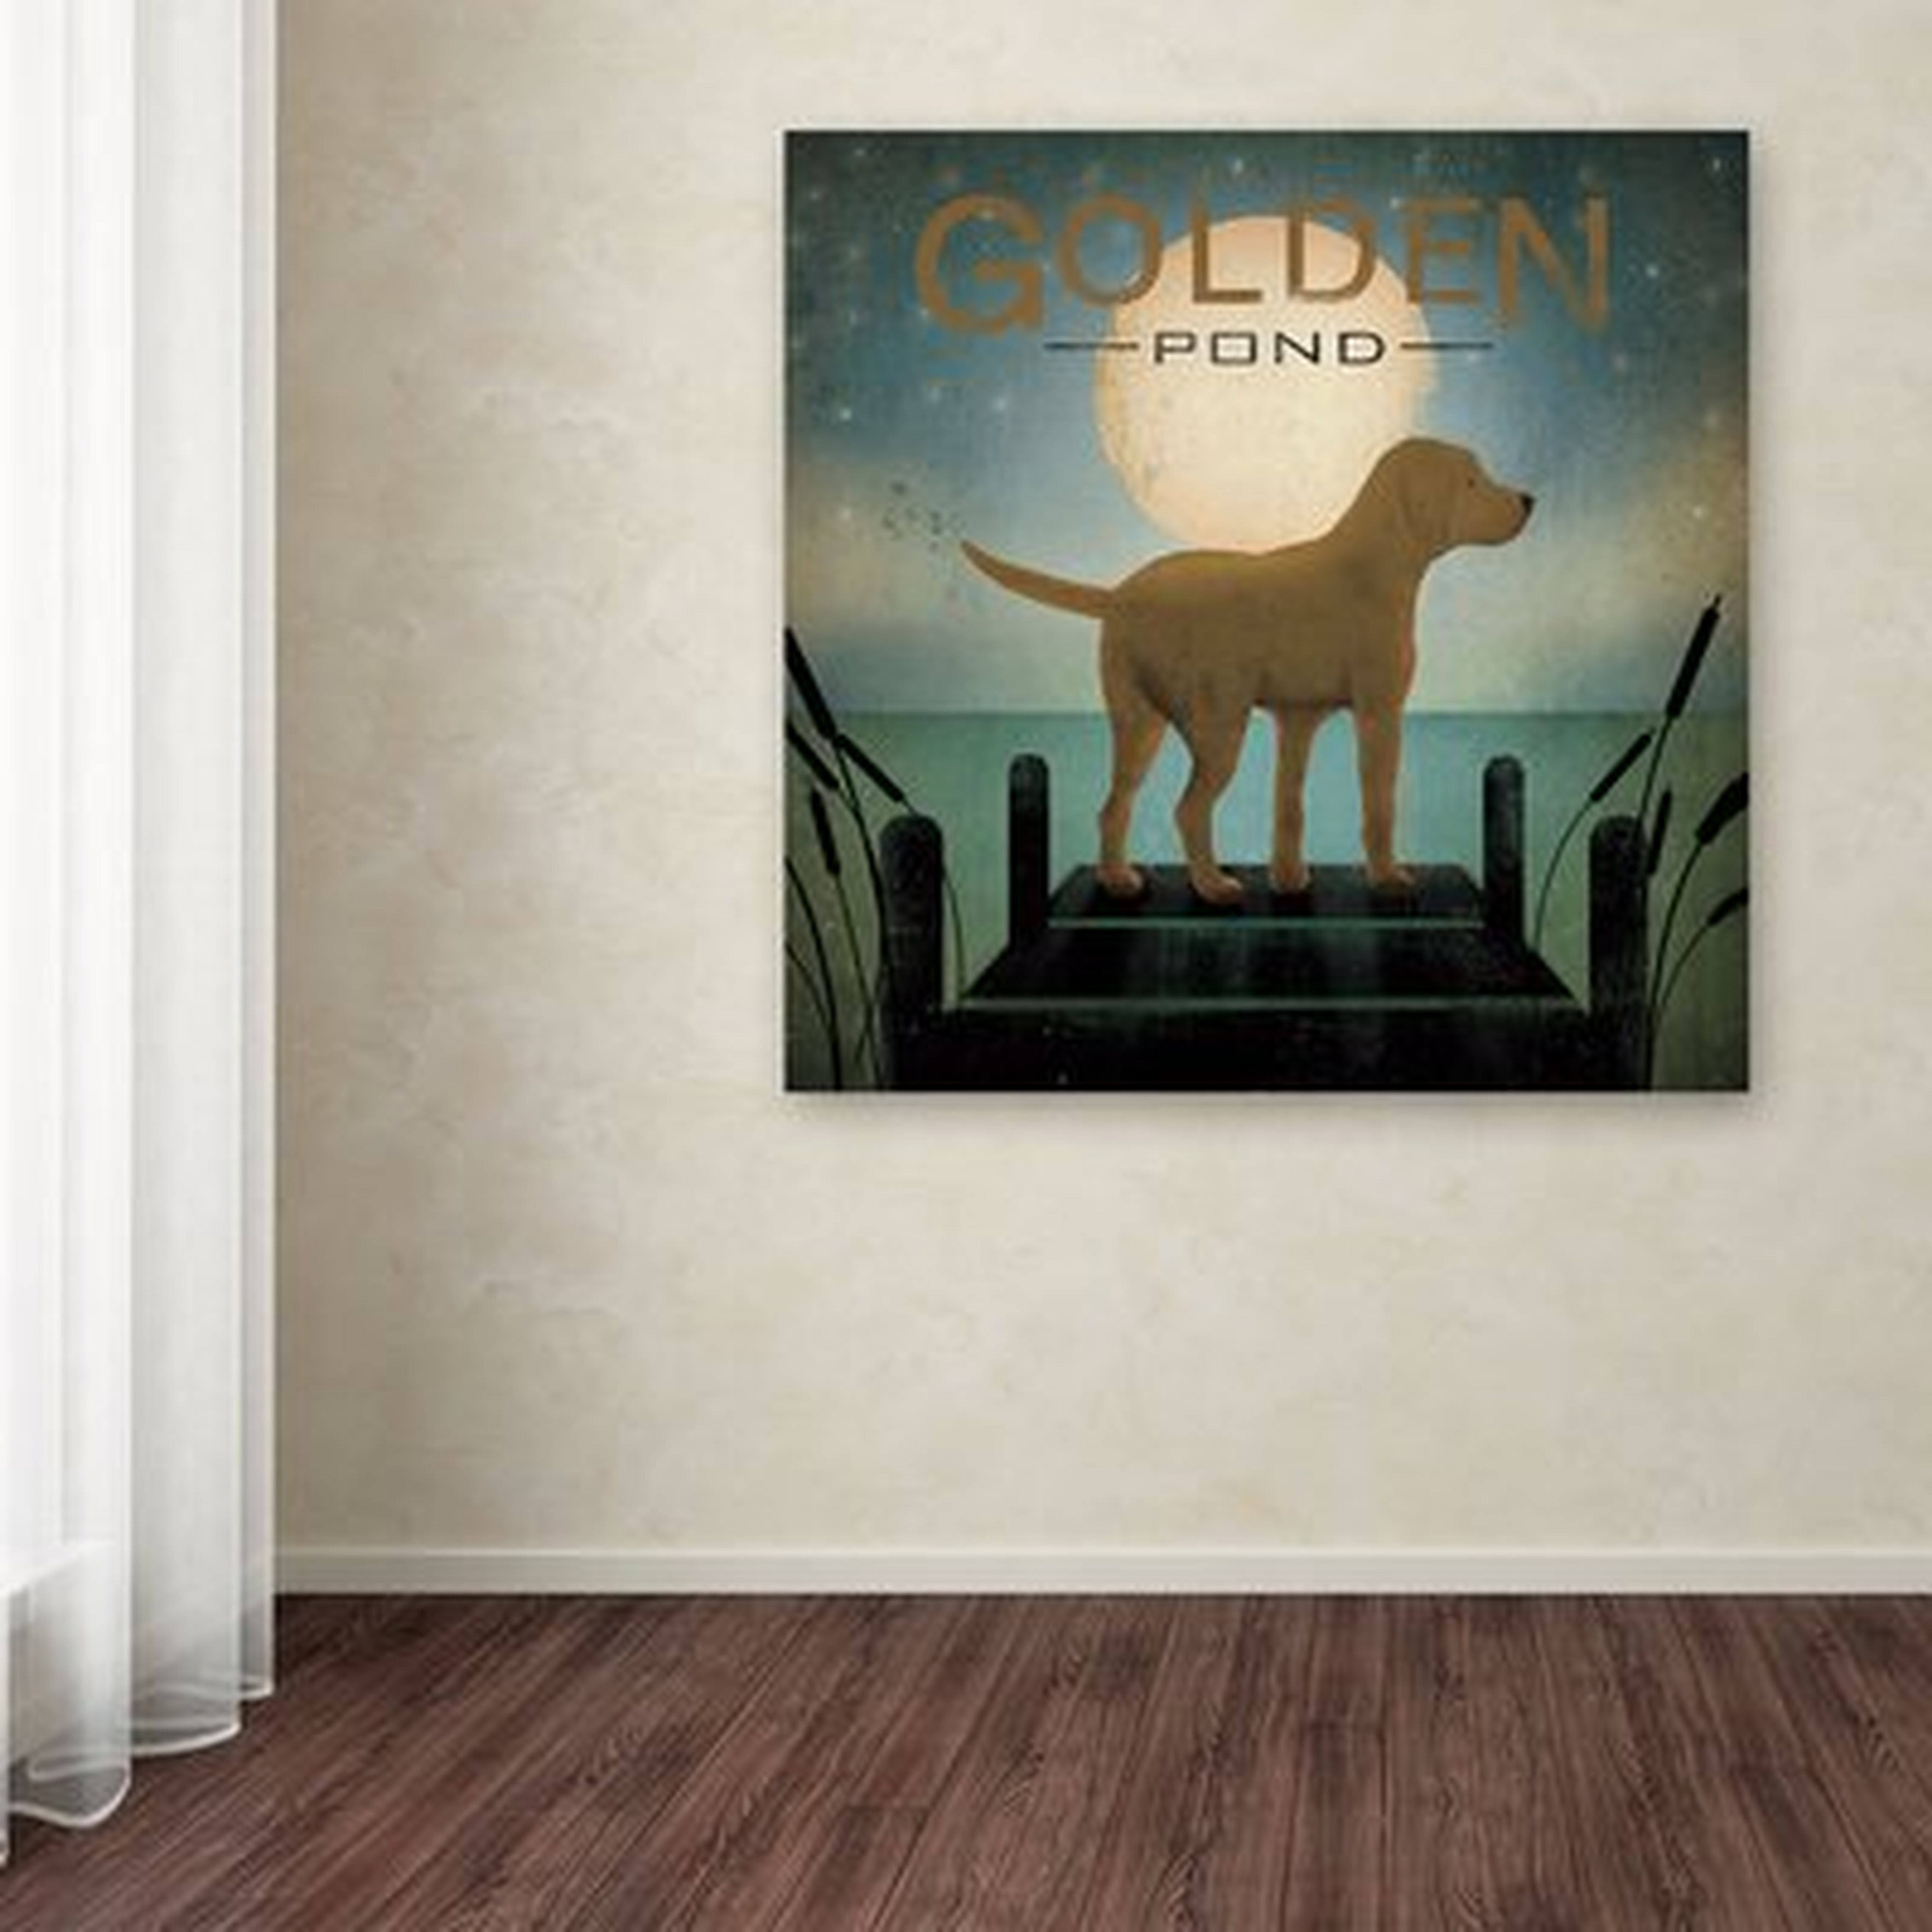 Moonrise Yellow Dog Golden Pond by Ryan Fowler Graphic Art on Wrapped Canvas - Wayfair